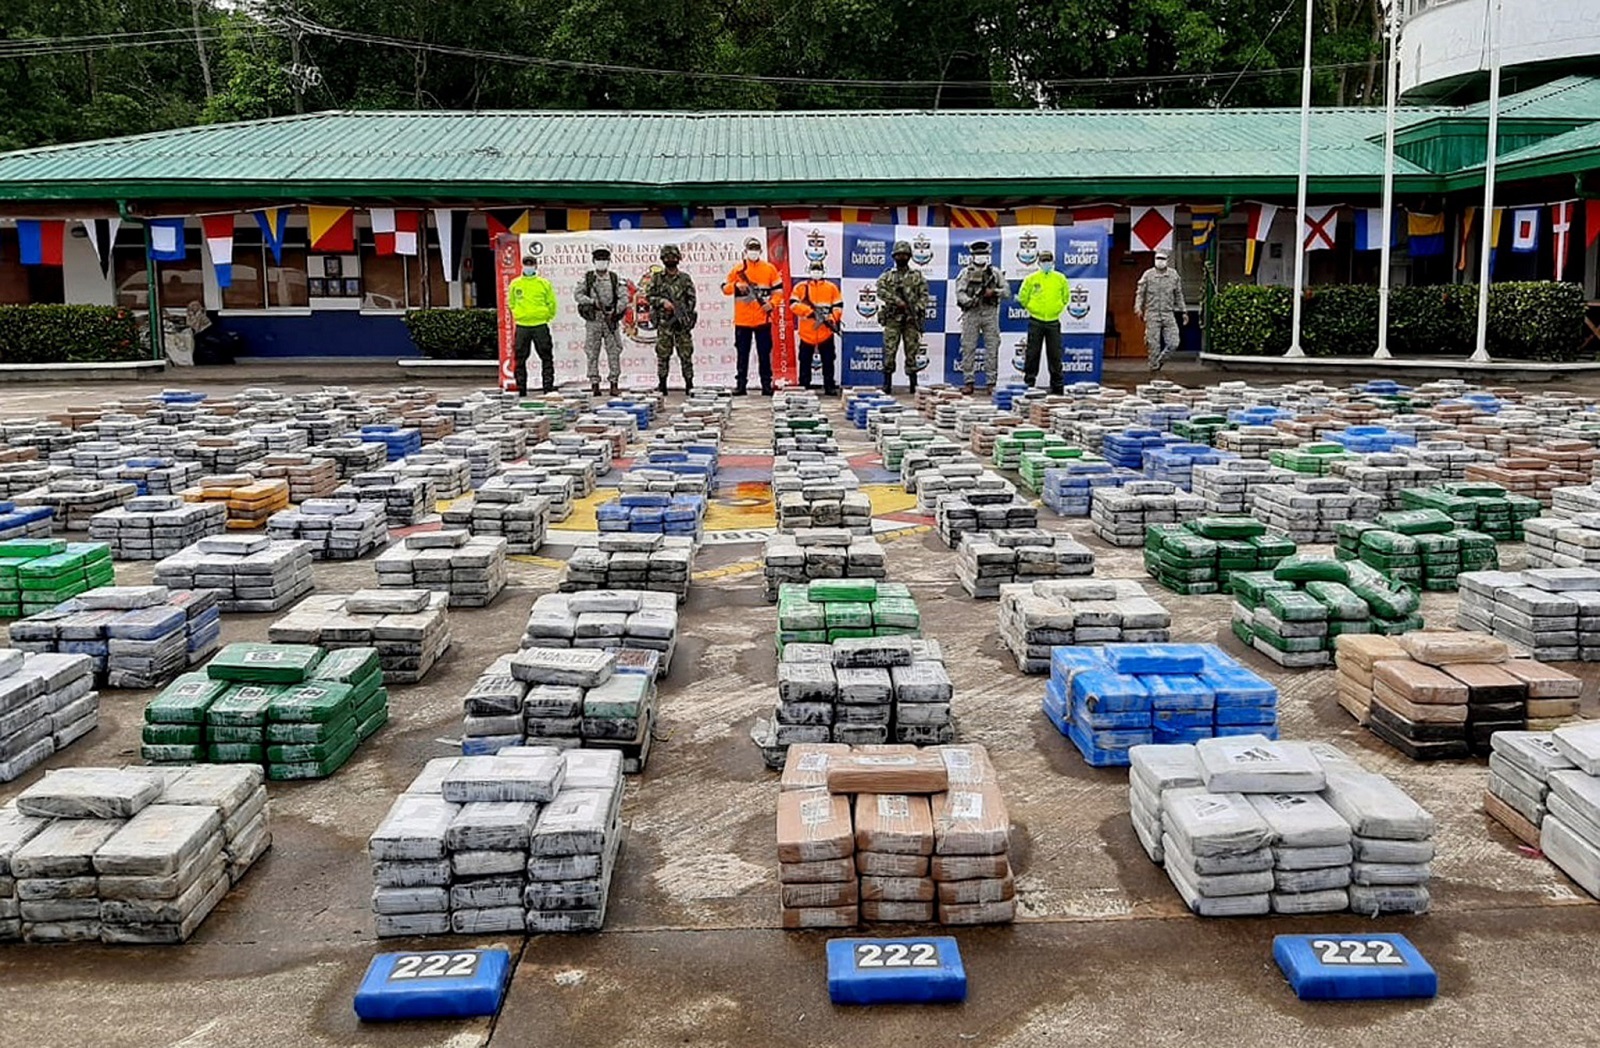 epa09345164 A handout photo made available by the Colombian Ministry of Defense shows a seized shipment of 5.4 tons of cocaine, exhibited by the authorities in Quibdo, Colombia, 14 July 2021. Colombian authorities seized 5.4 tons of cocaine owned by the Clan del Golfo, the country's largest criminal gang, in the department of Choco, bordering Panama, military sources reported on Wednesday.  EPA/Ministry of Defense Colombia / H  HANDOUT EDITORIAL USE ONLY/NO SALES